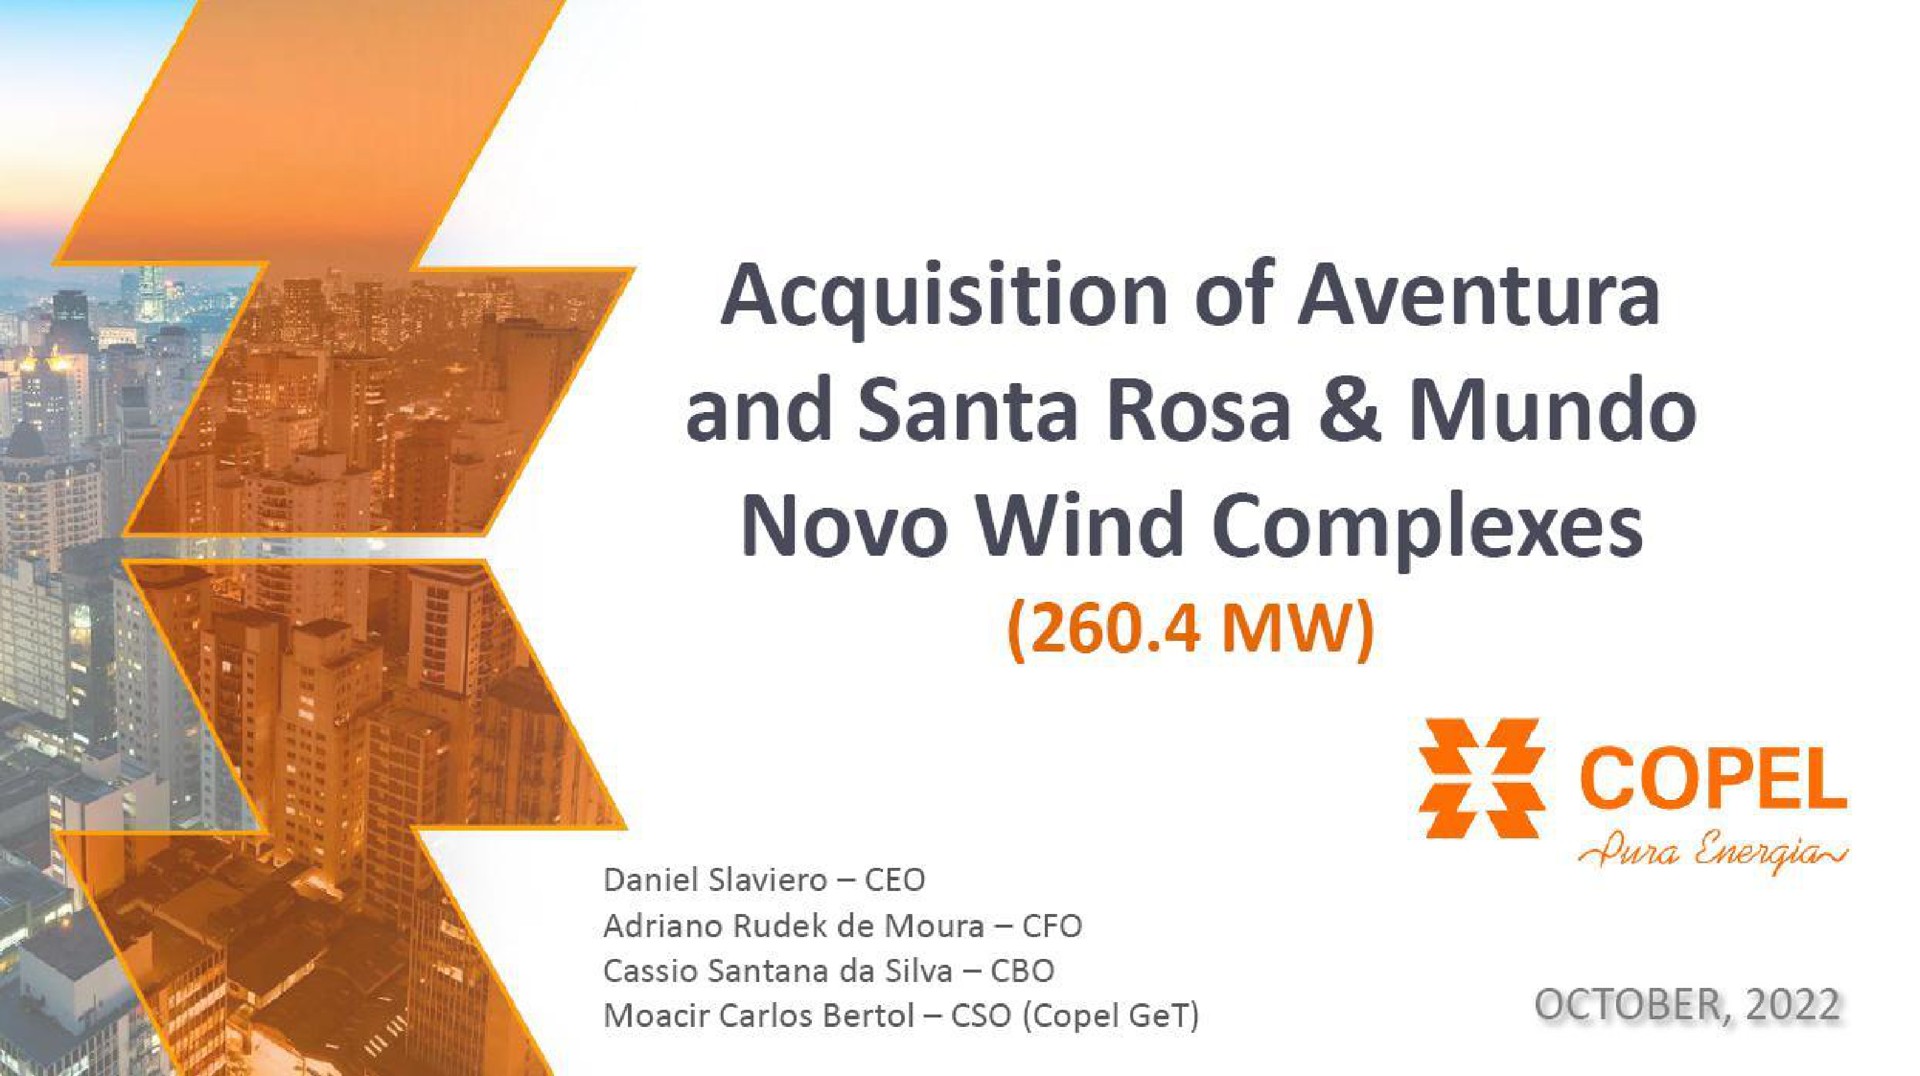 acquisition of and wind complexes | Energy Company of Parana